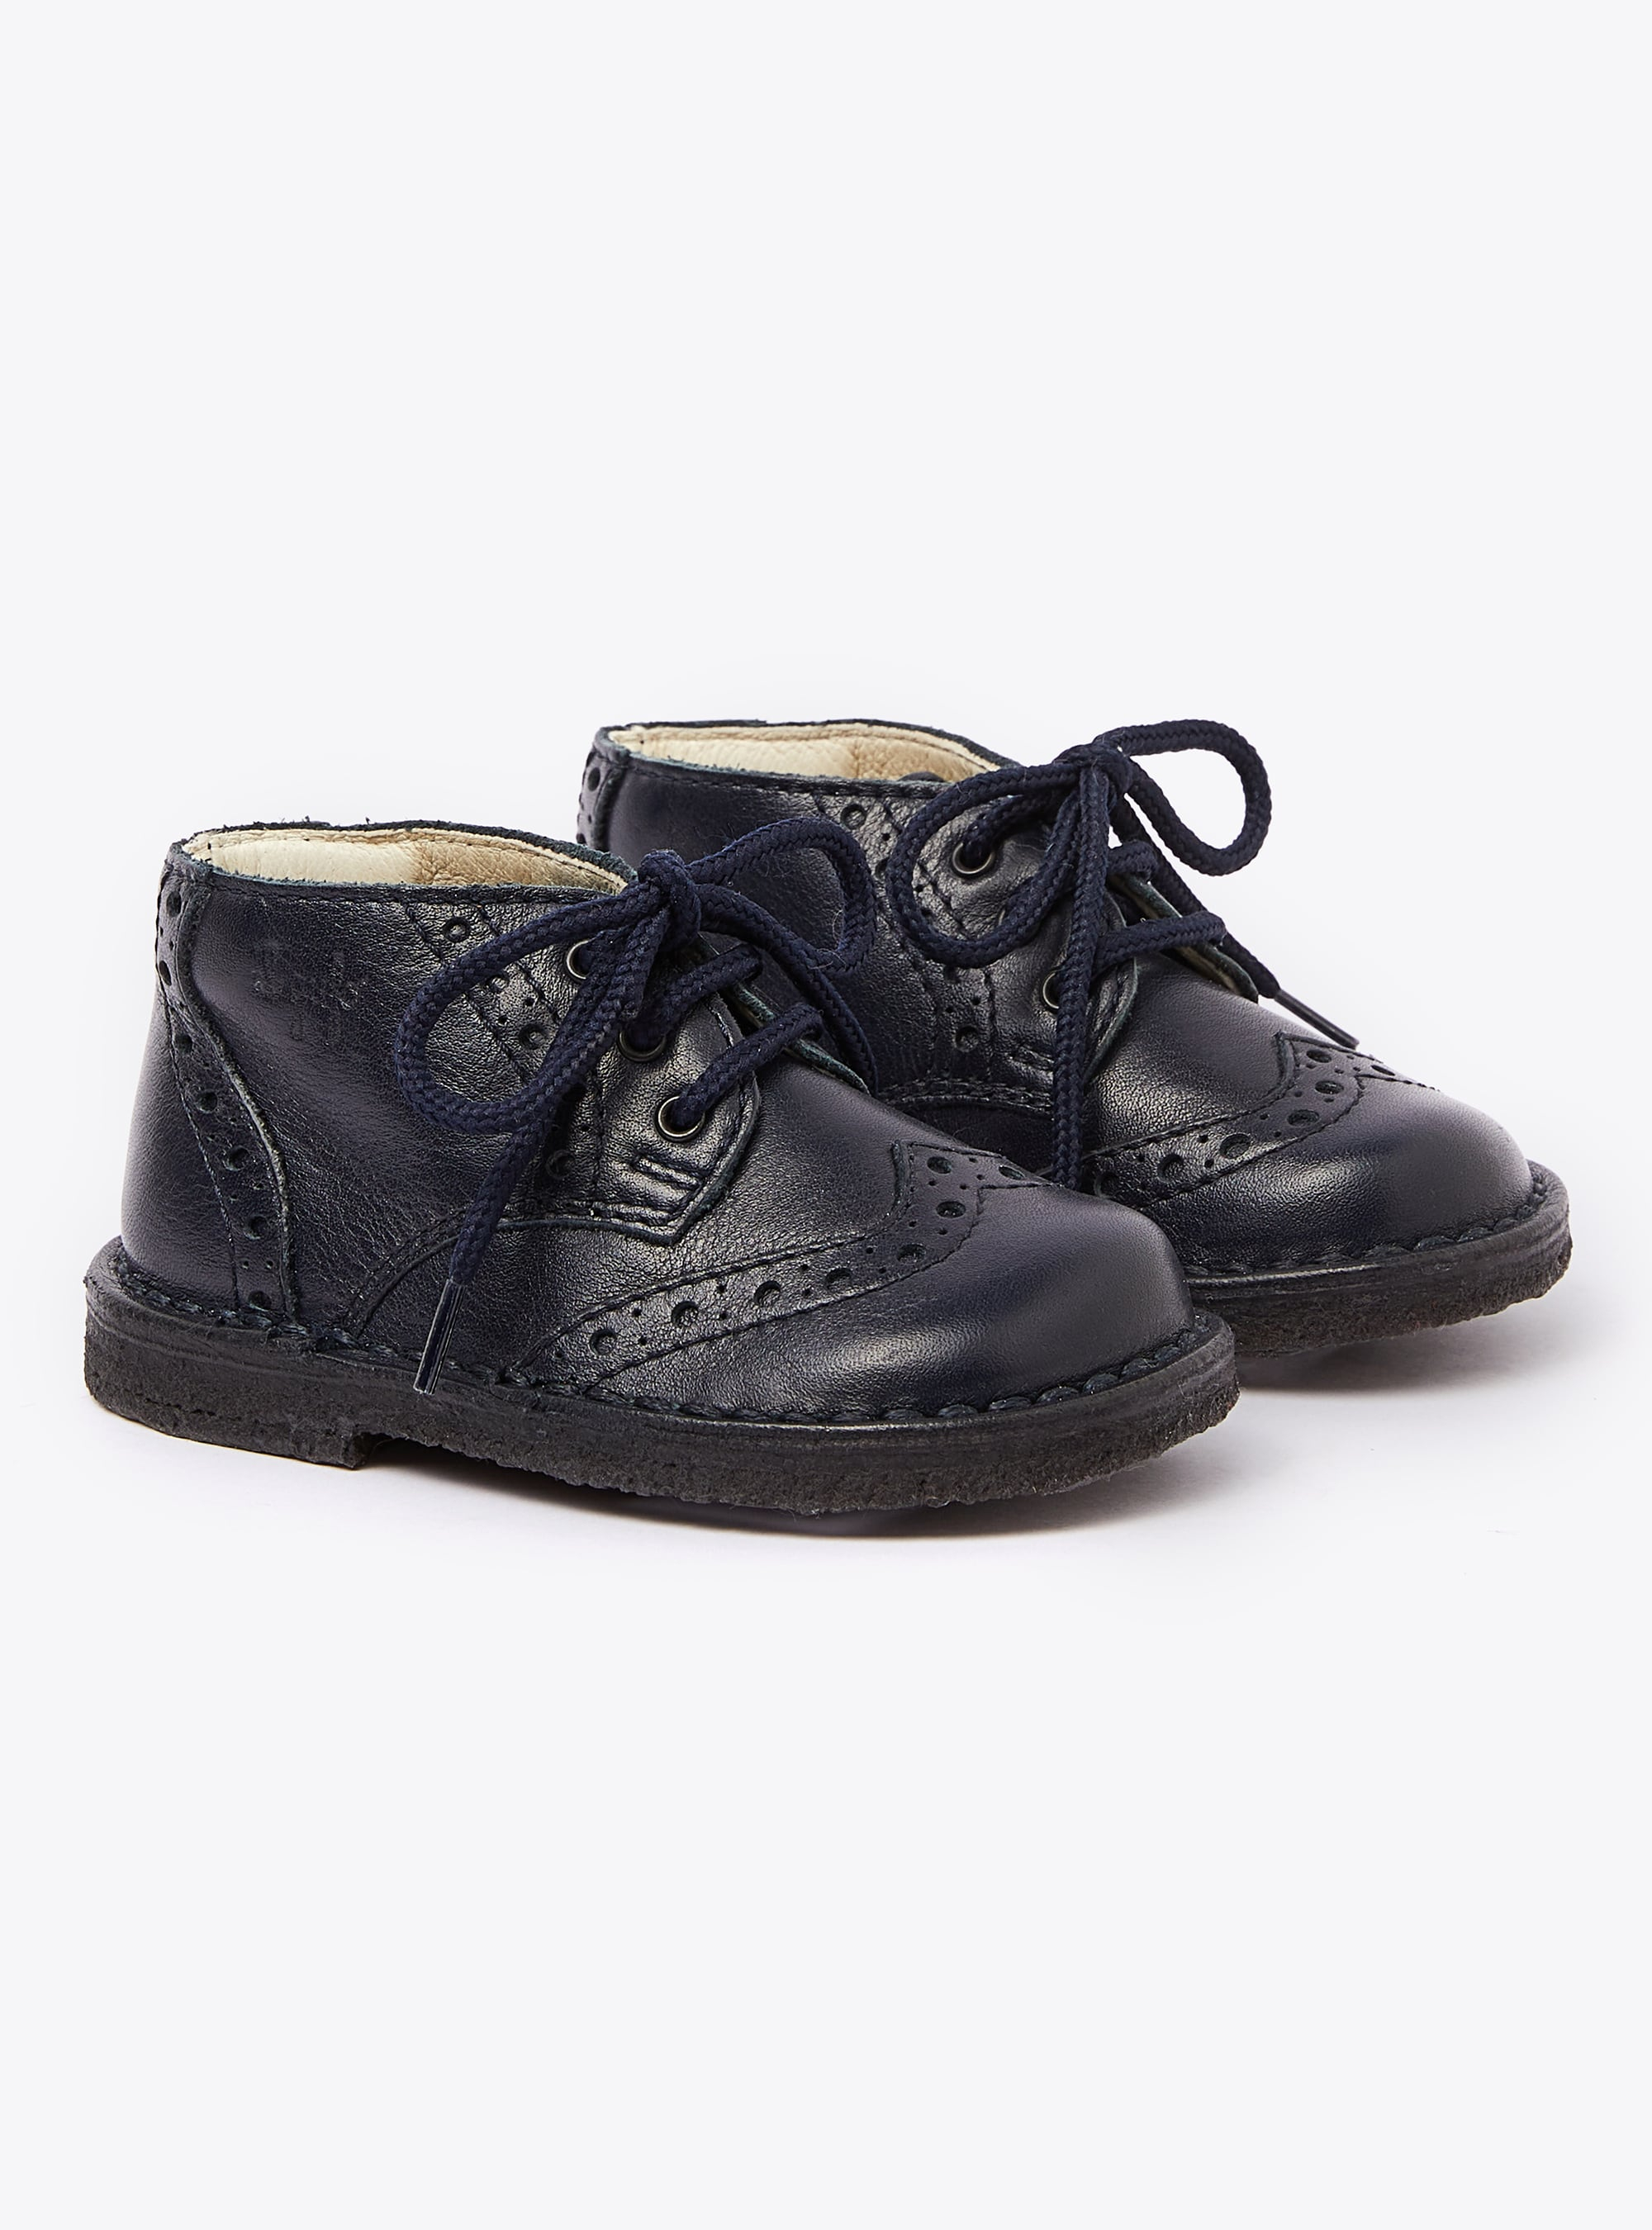 Navy leather lace-up shoes - Shoes - Il Gufo